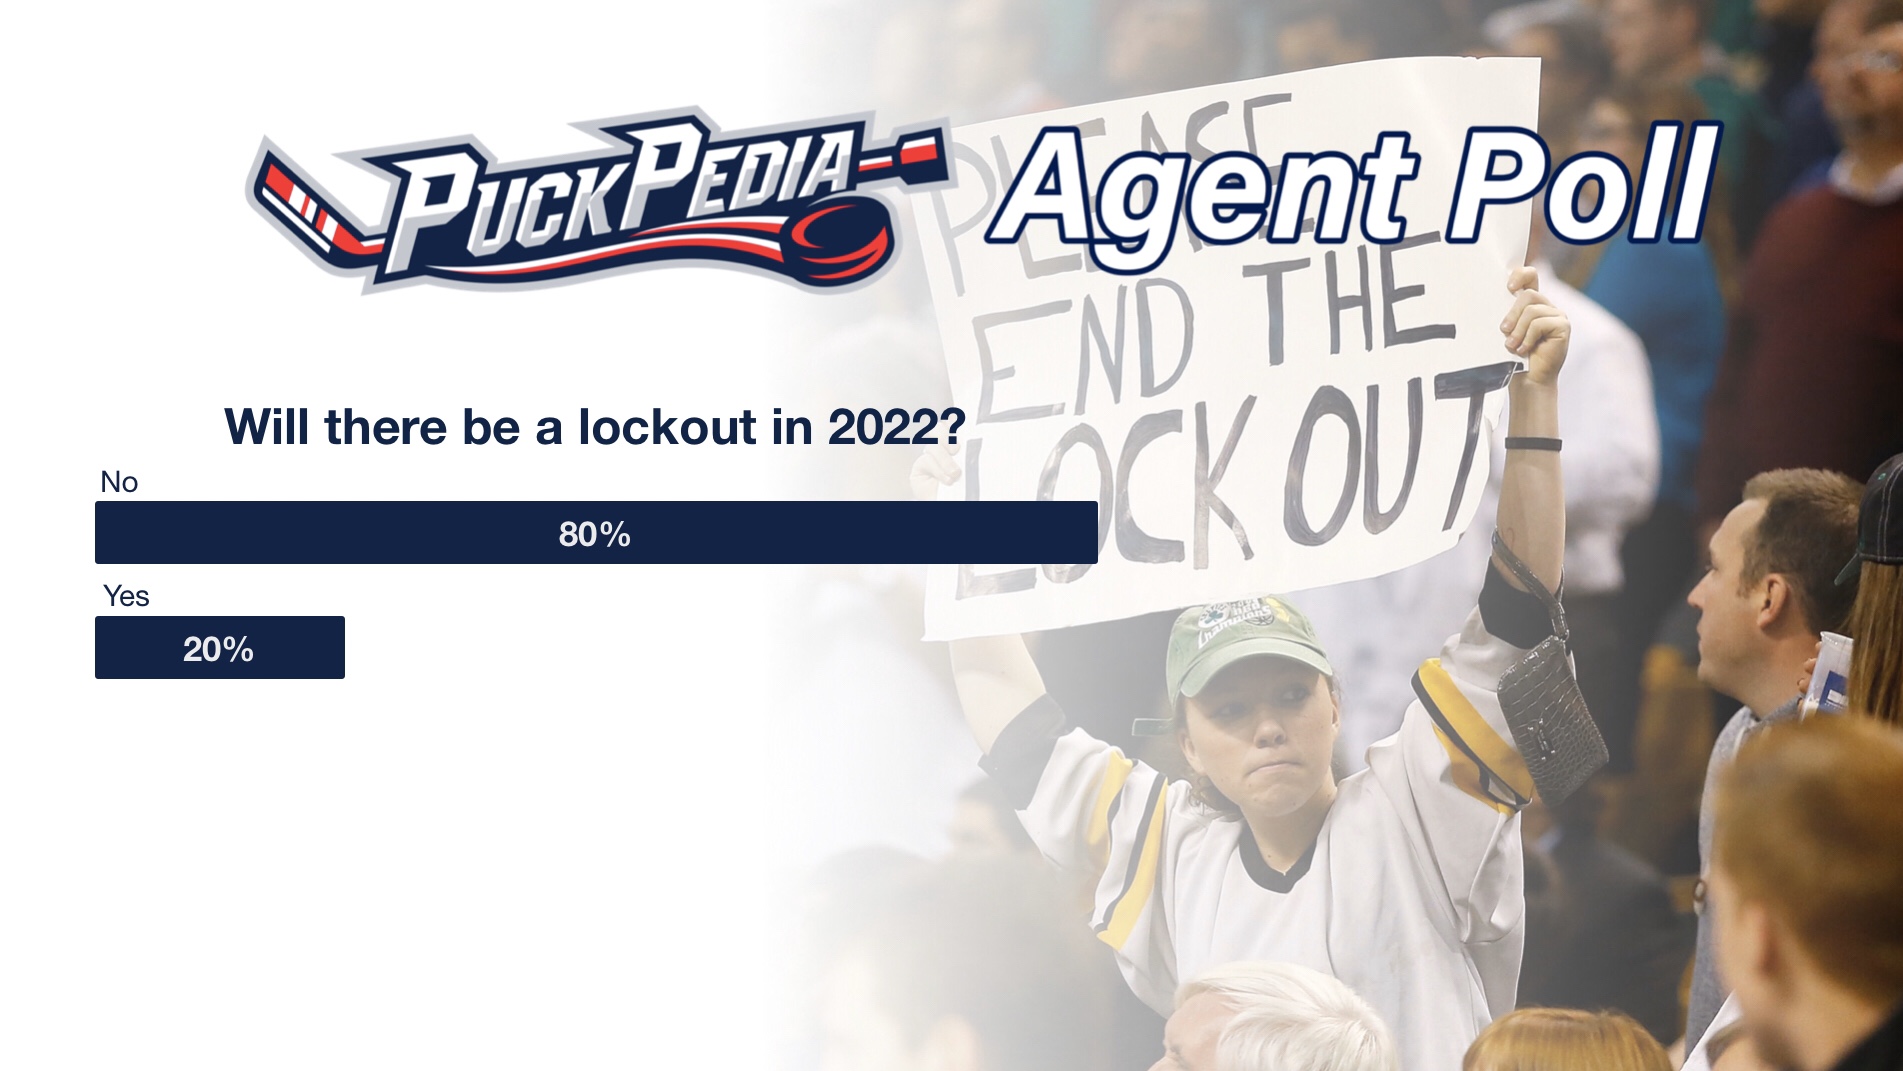 Will there be a lockout in 2022?